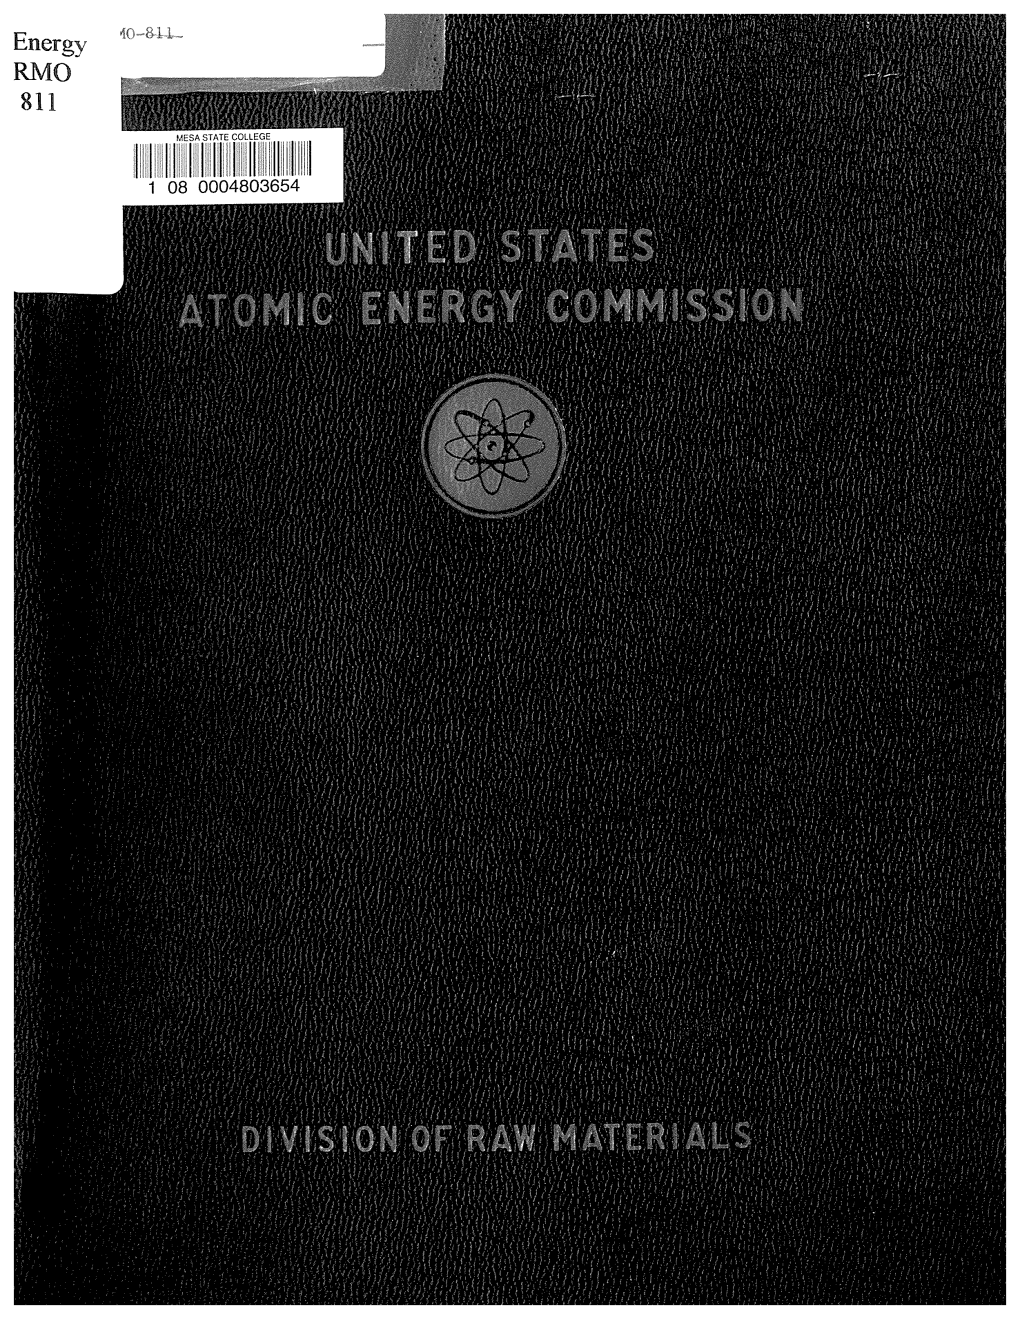 Energy RMO 811 UNITED STATES ATOMIC ENERGY COMMISSION DIVISION of RAW MATERIALS EXPLORATION BRANCH